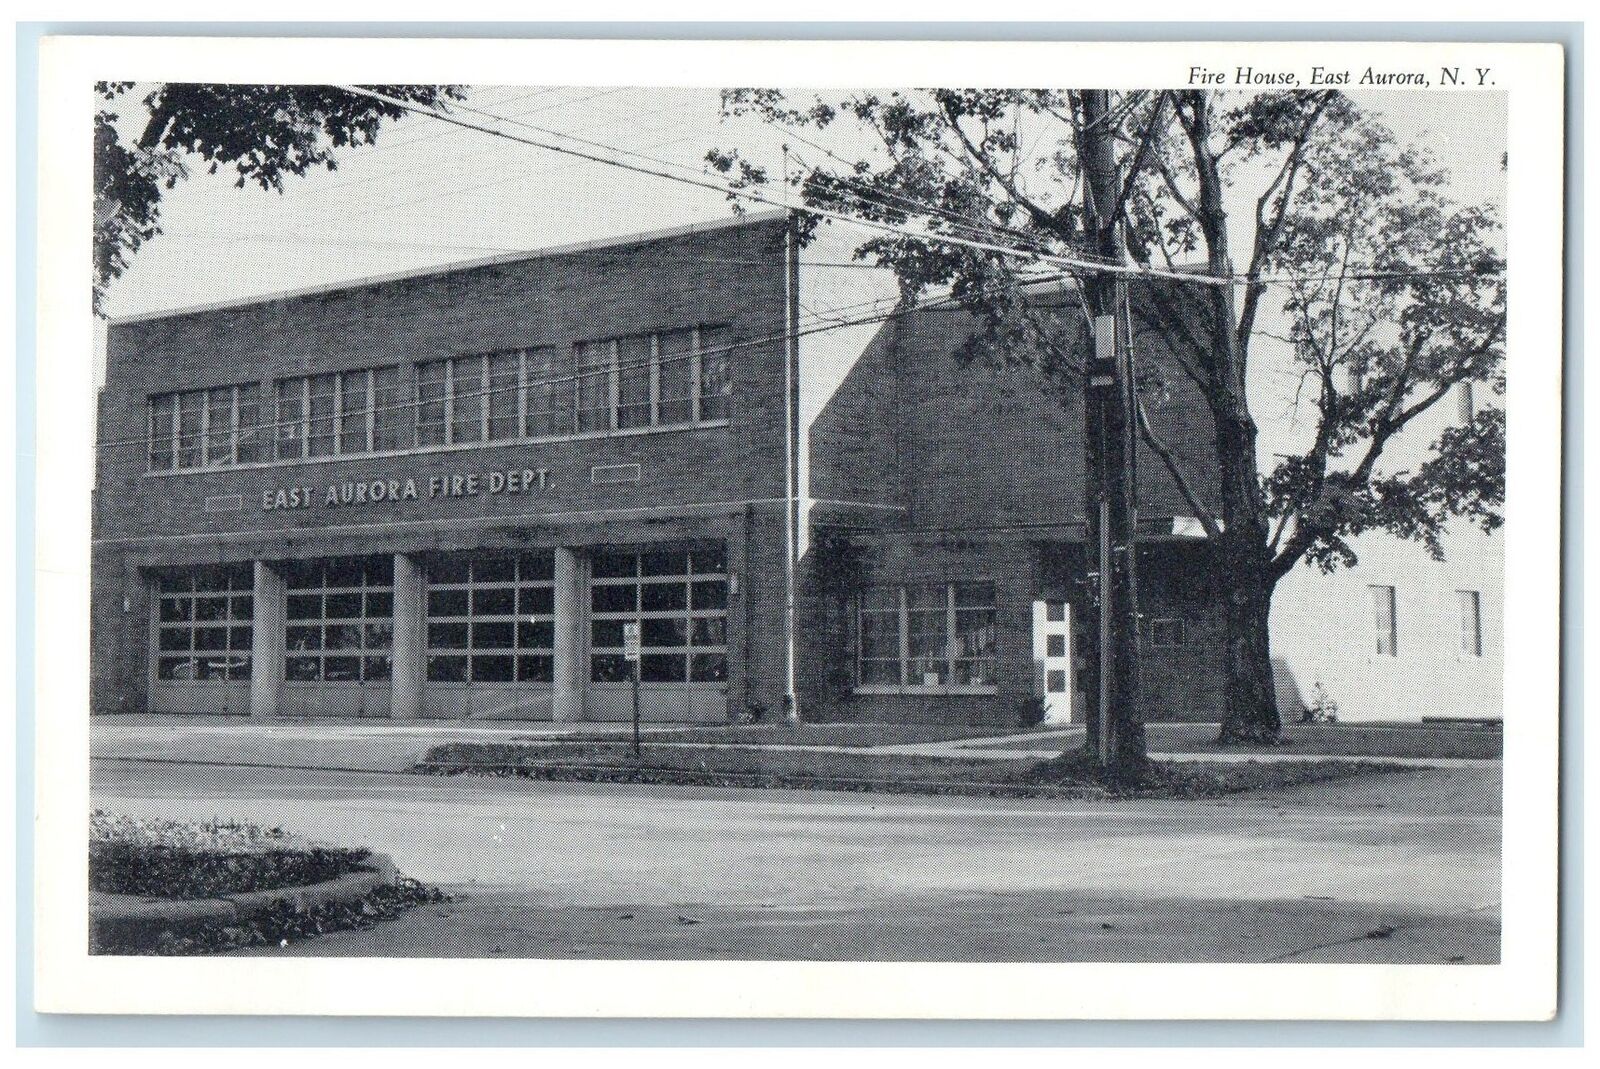 c1950's Fire House Fire Department Building East Aurora New York NY Postcard